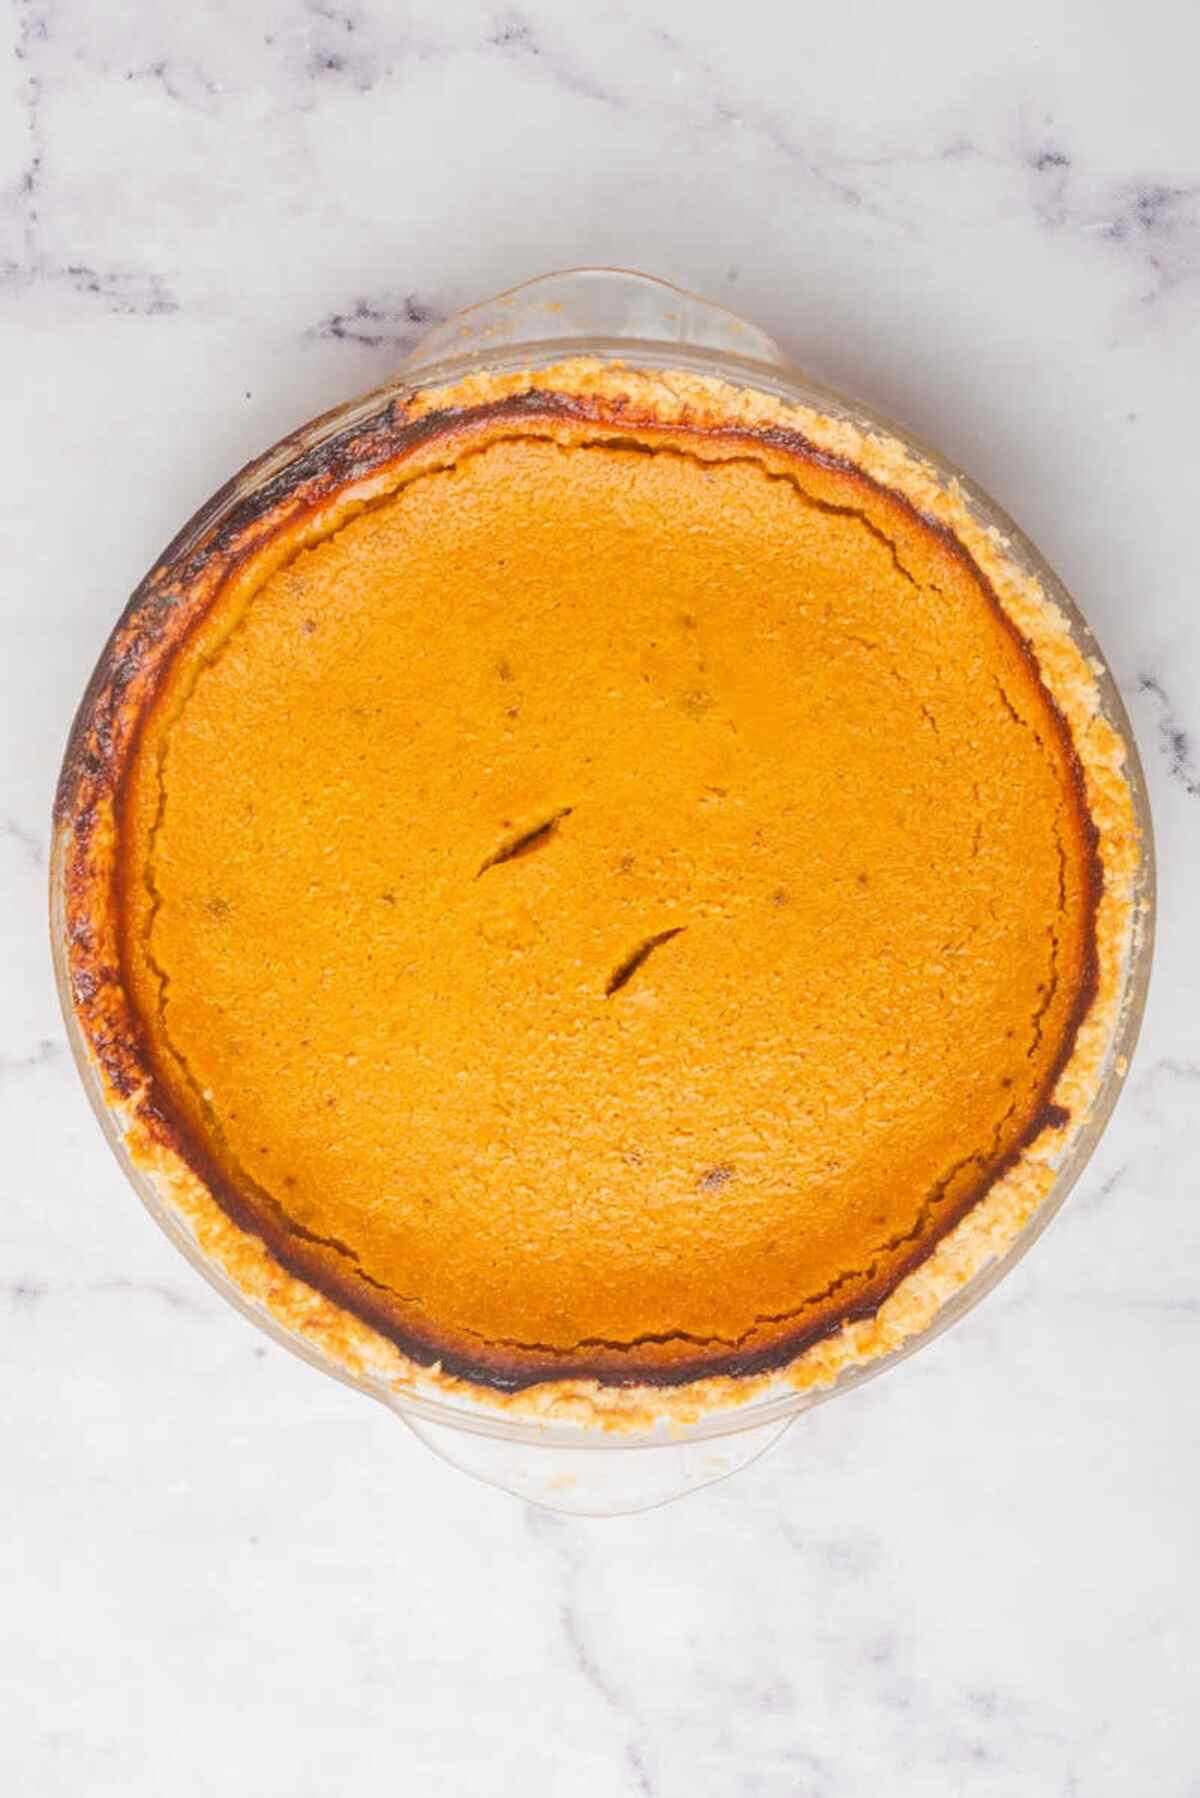 A freshly baked pumpkin pie with a slightly cracked surface, indicating it's ready to be served.